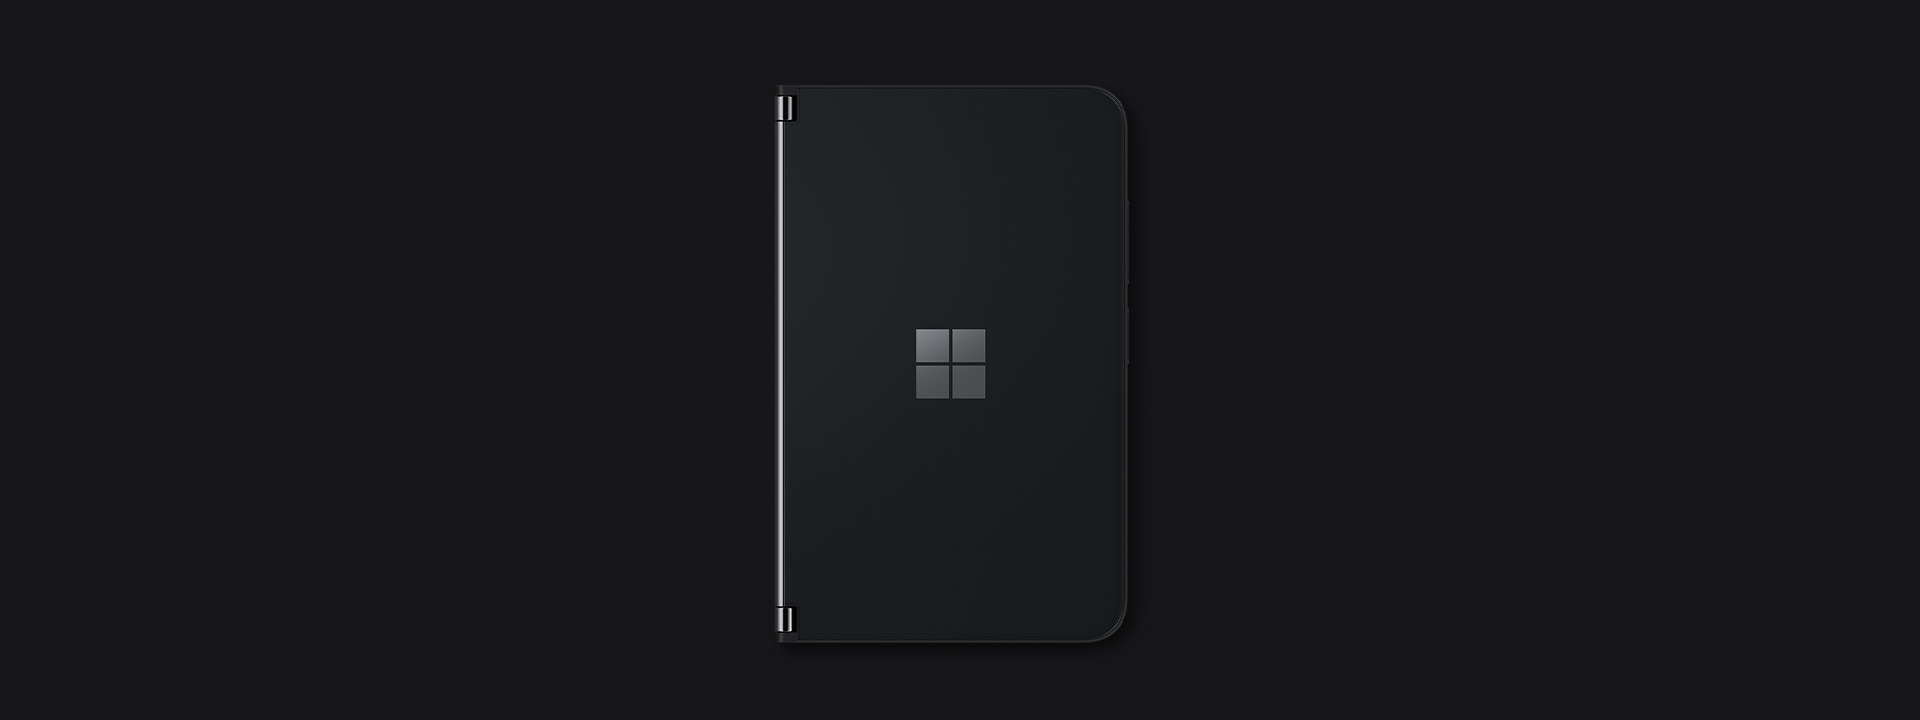 Surface Duo 2 closed.